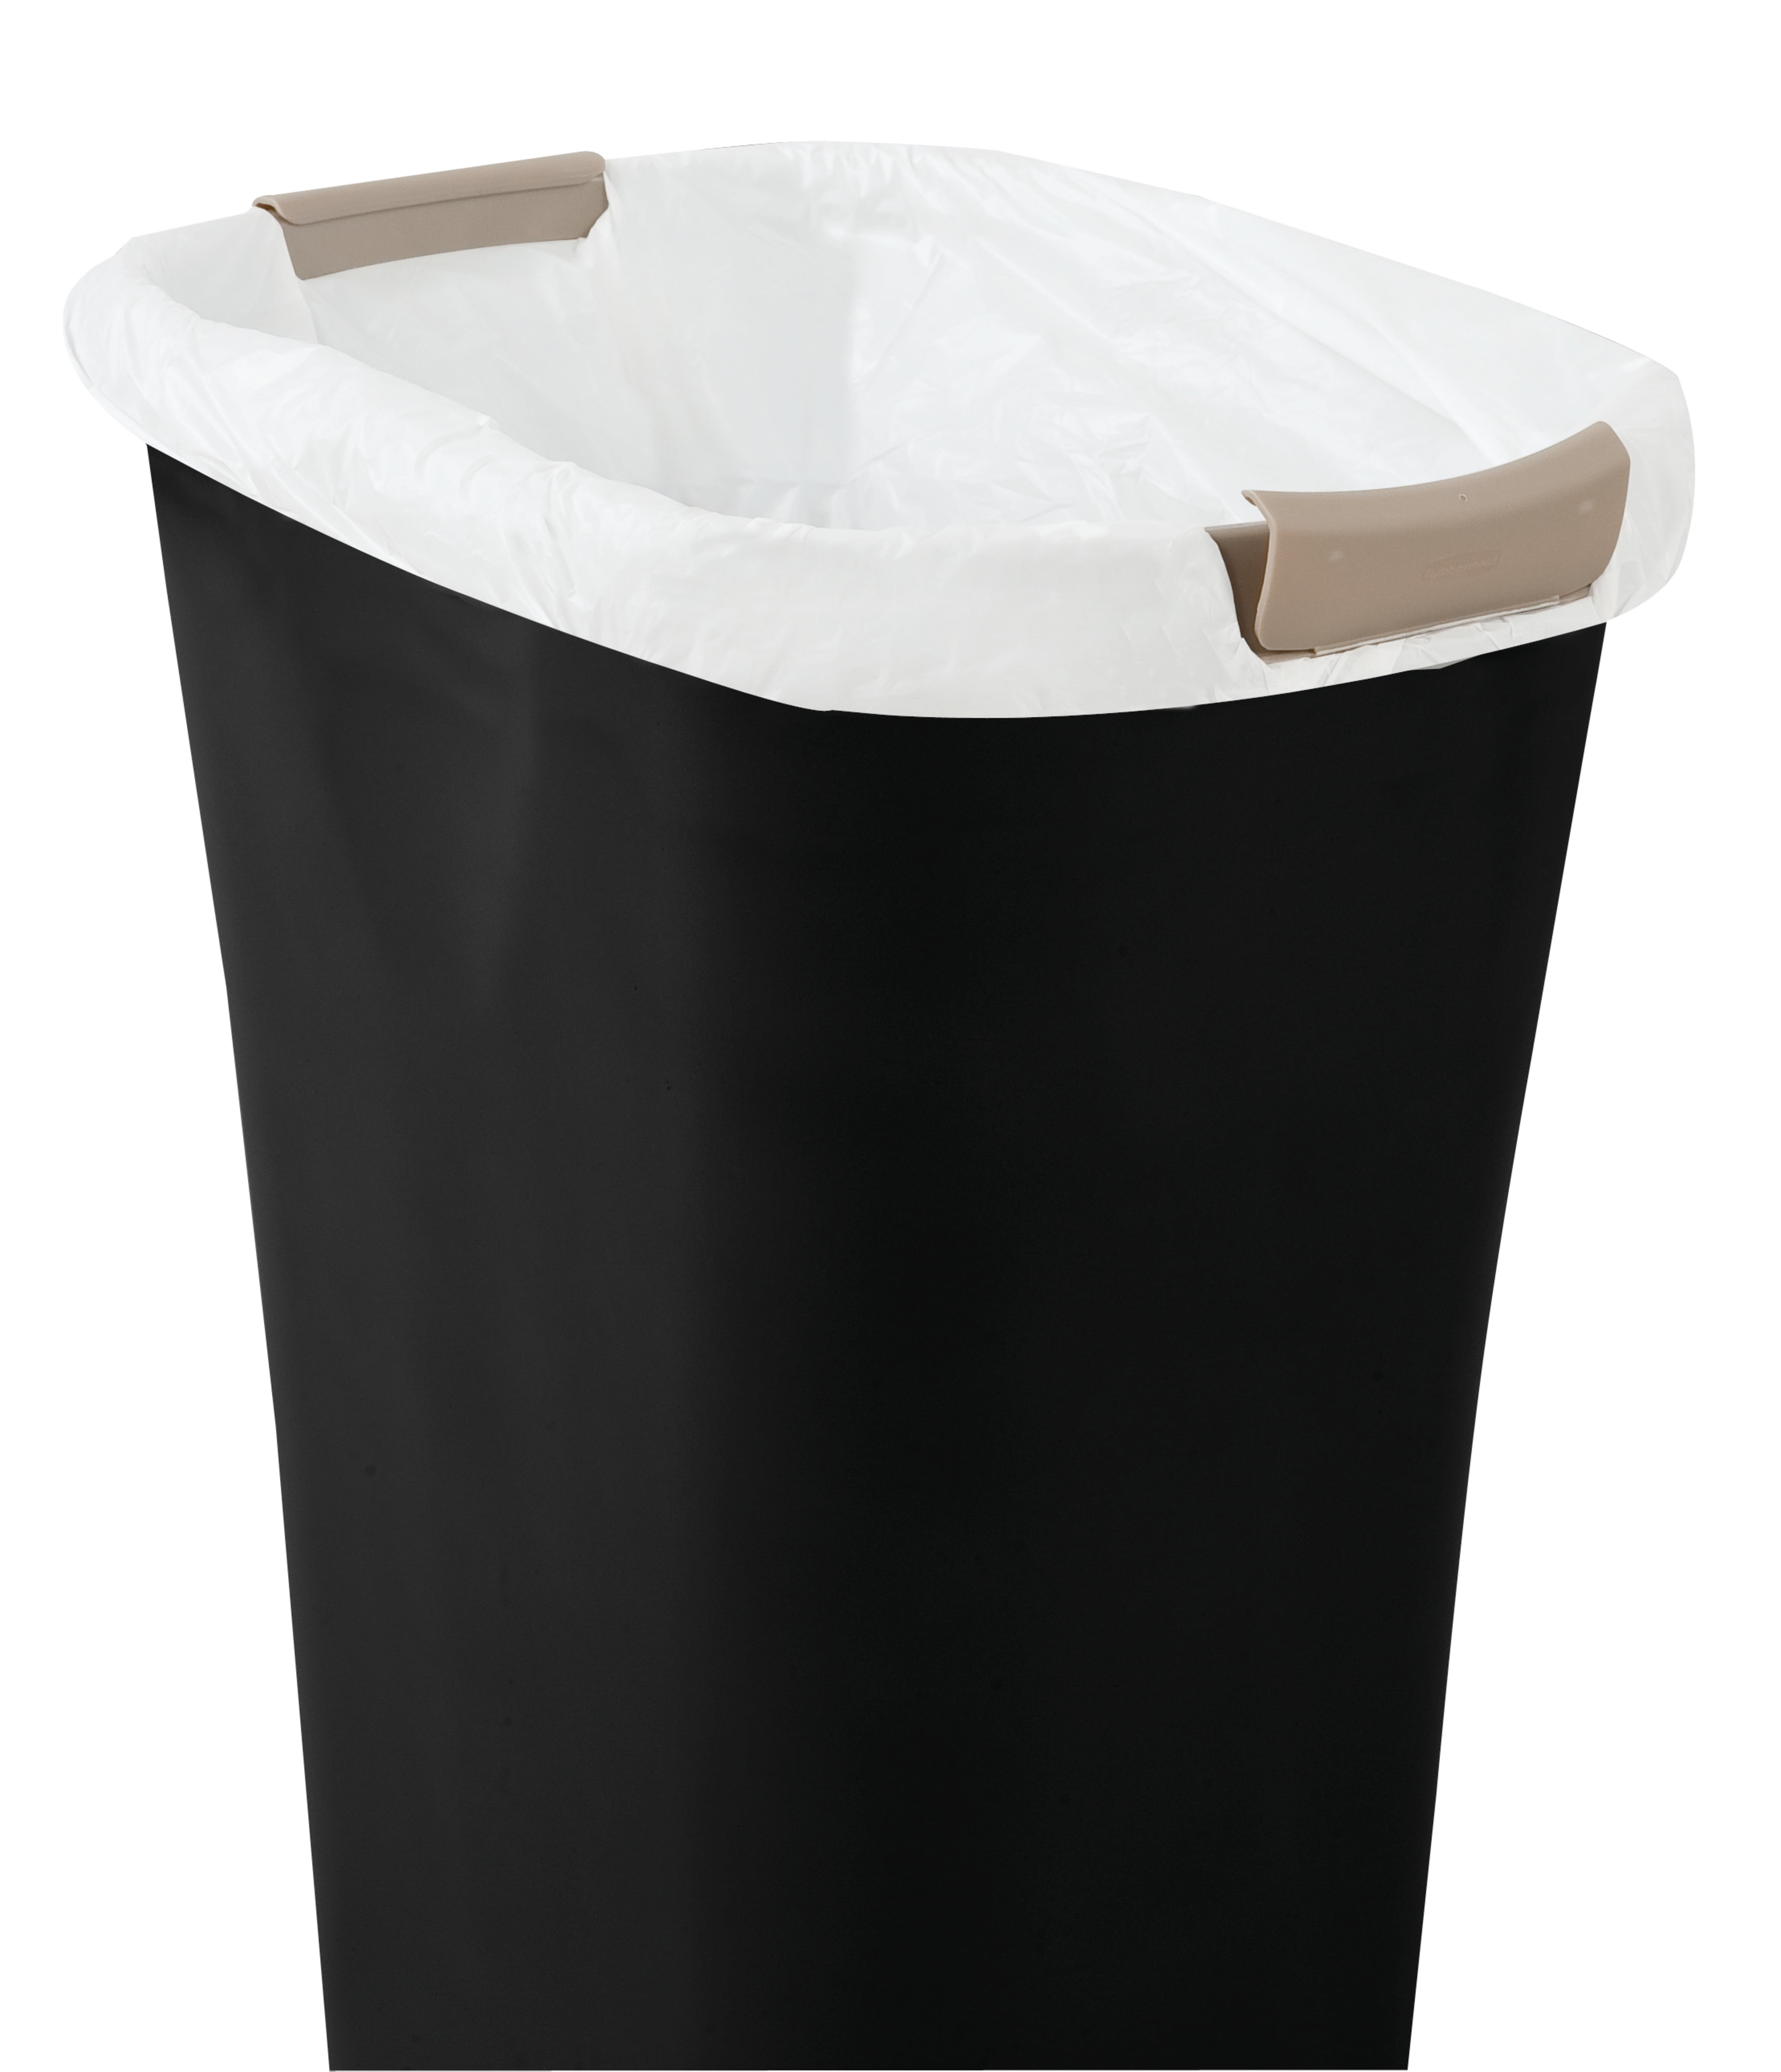 Rubbermaid 8 Gallon Plastic Home/Office Wastebasket Trash Can with Liner  Lock, 1 Piece - Kroger